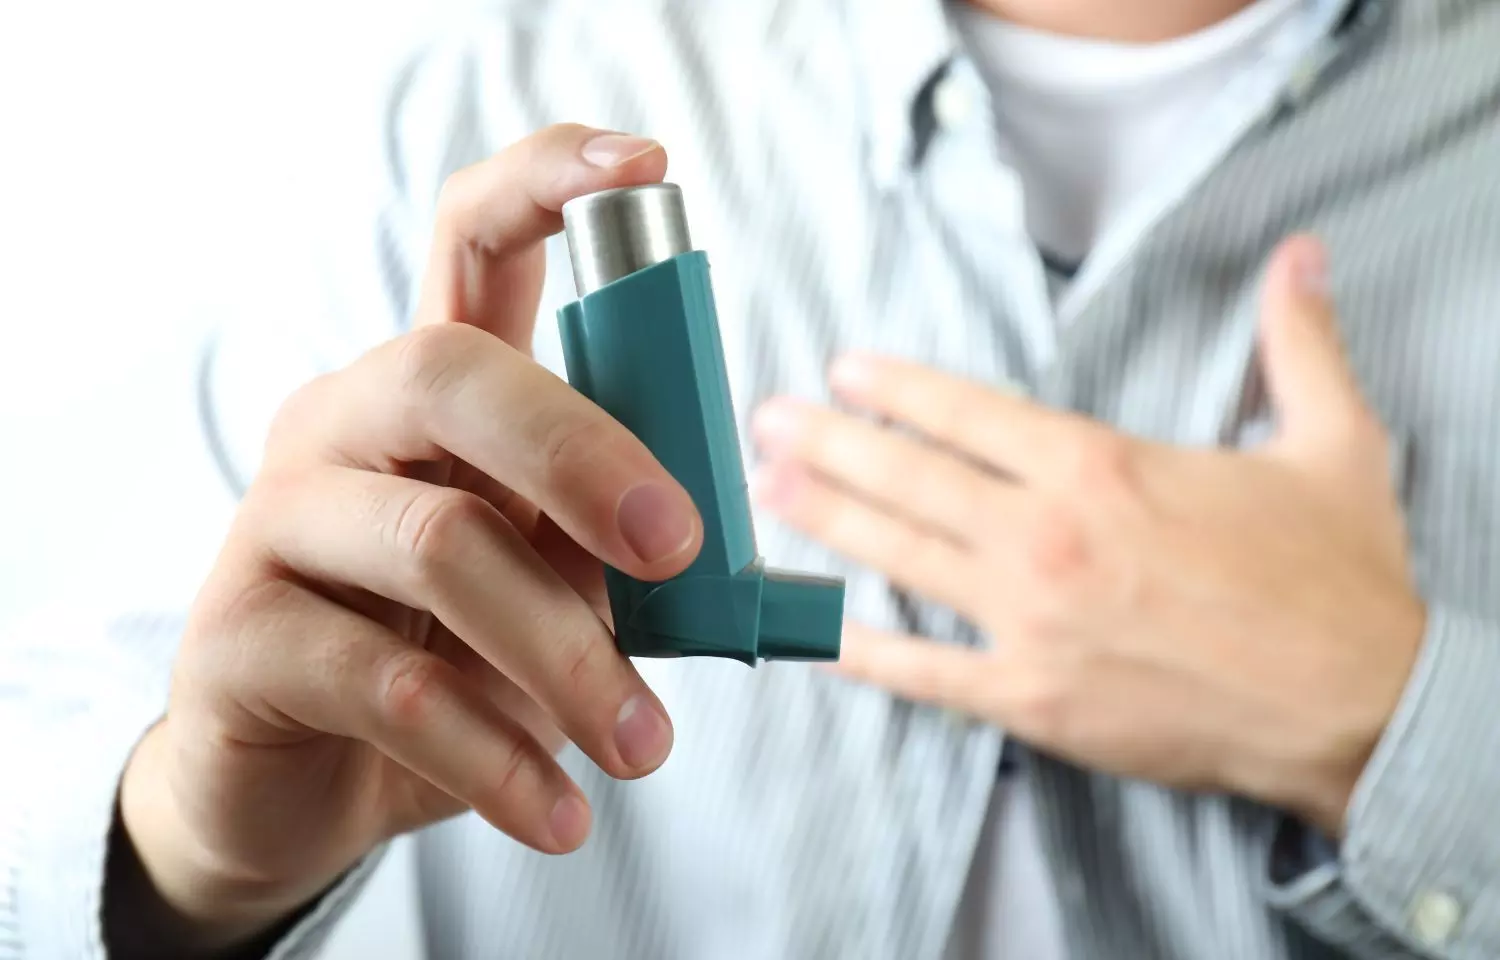 Early exposure to antibiotics can cause permanent asthma and allergies